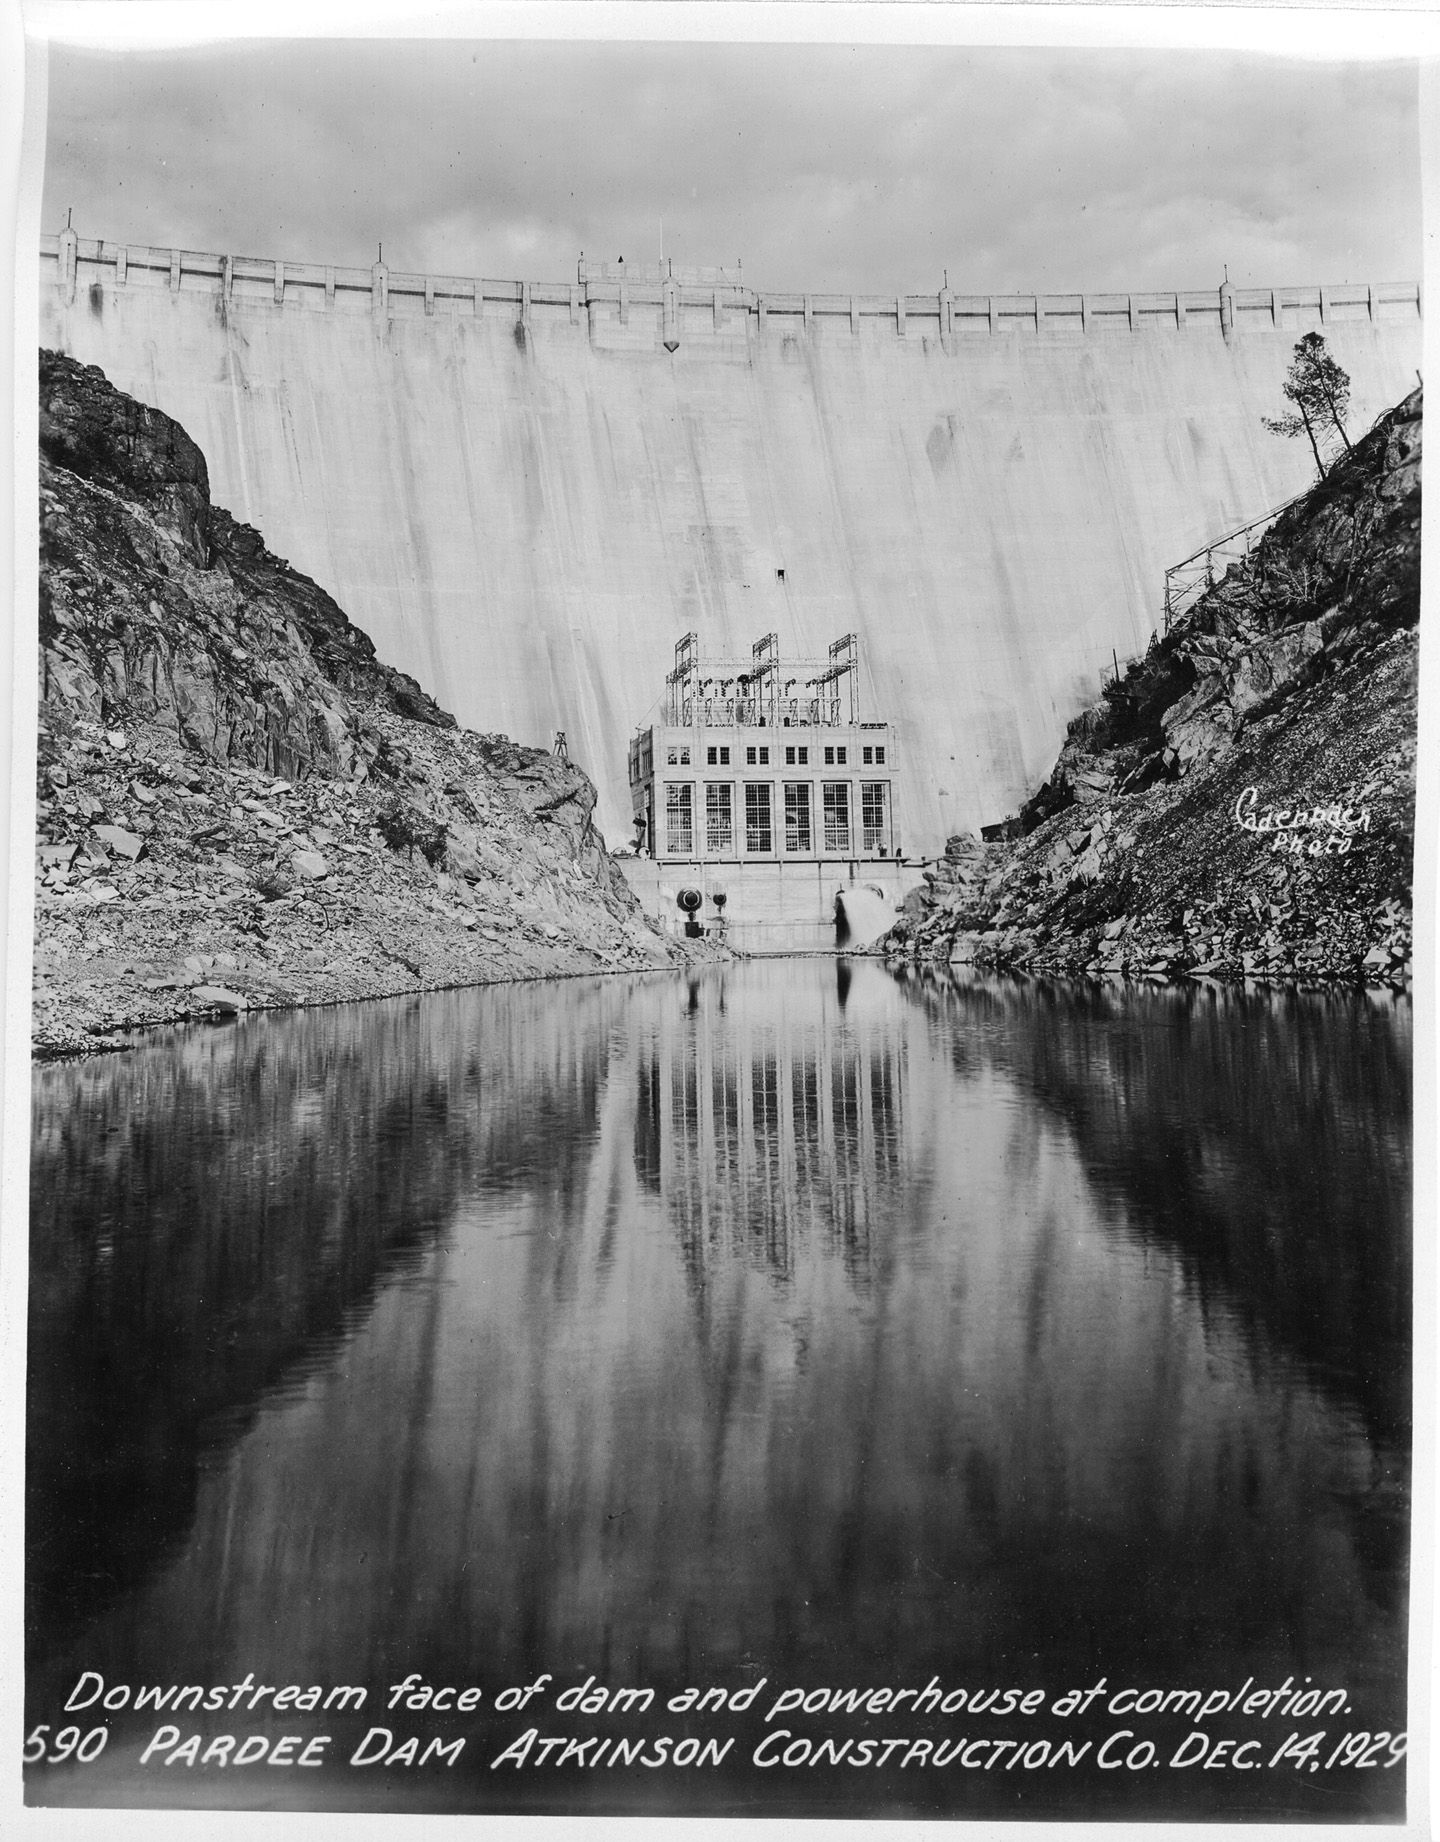 Downstream face of dam and powerhouse at completion. (December 1929)